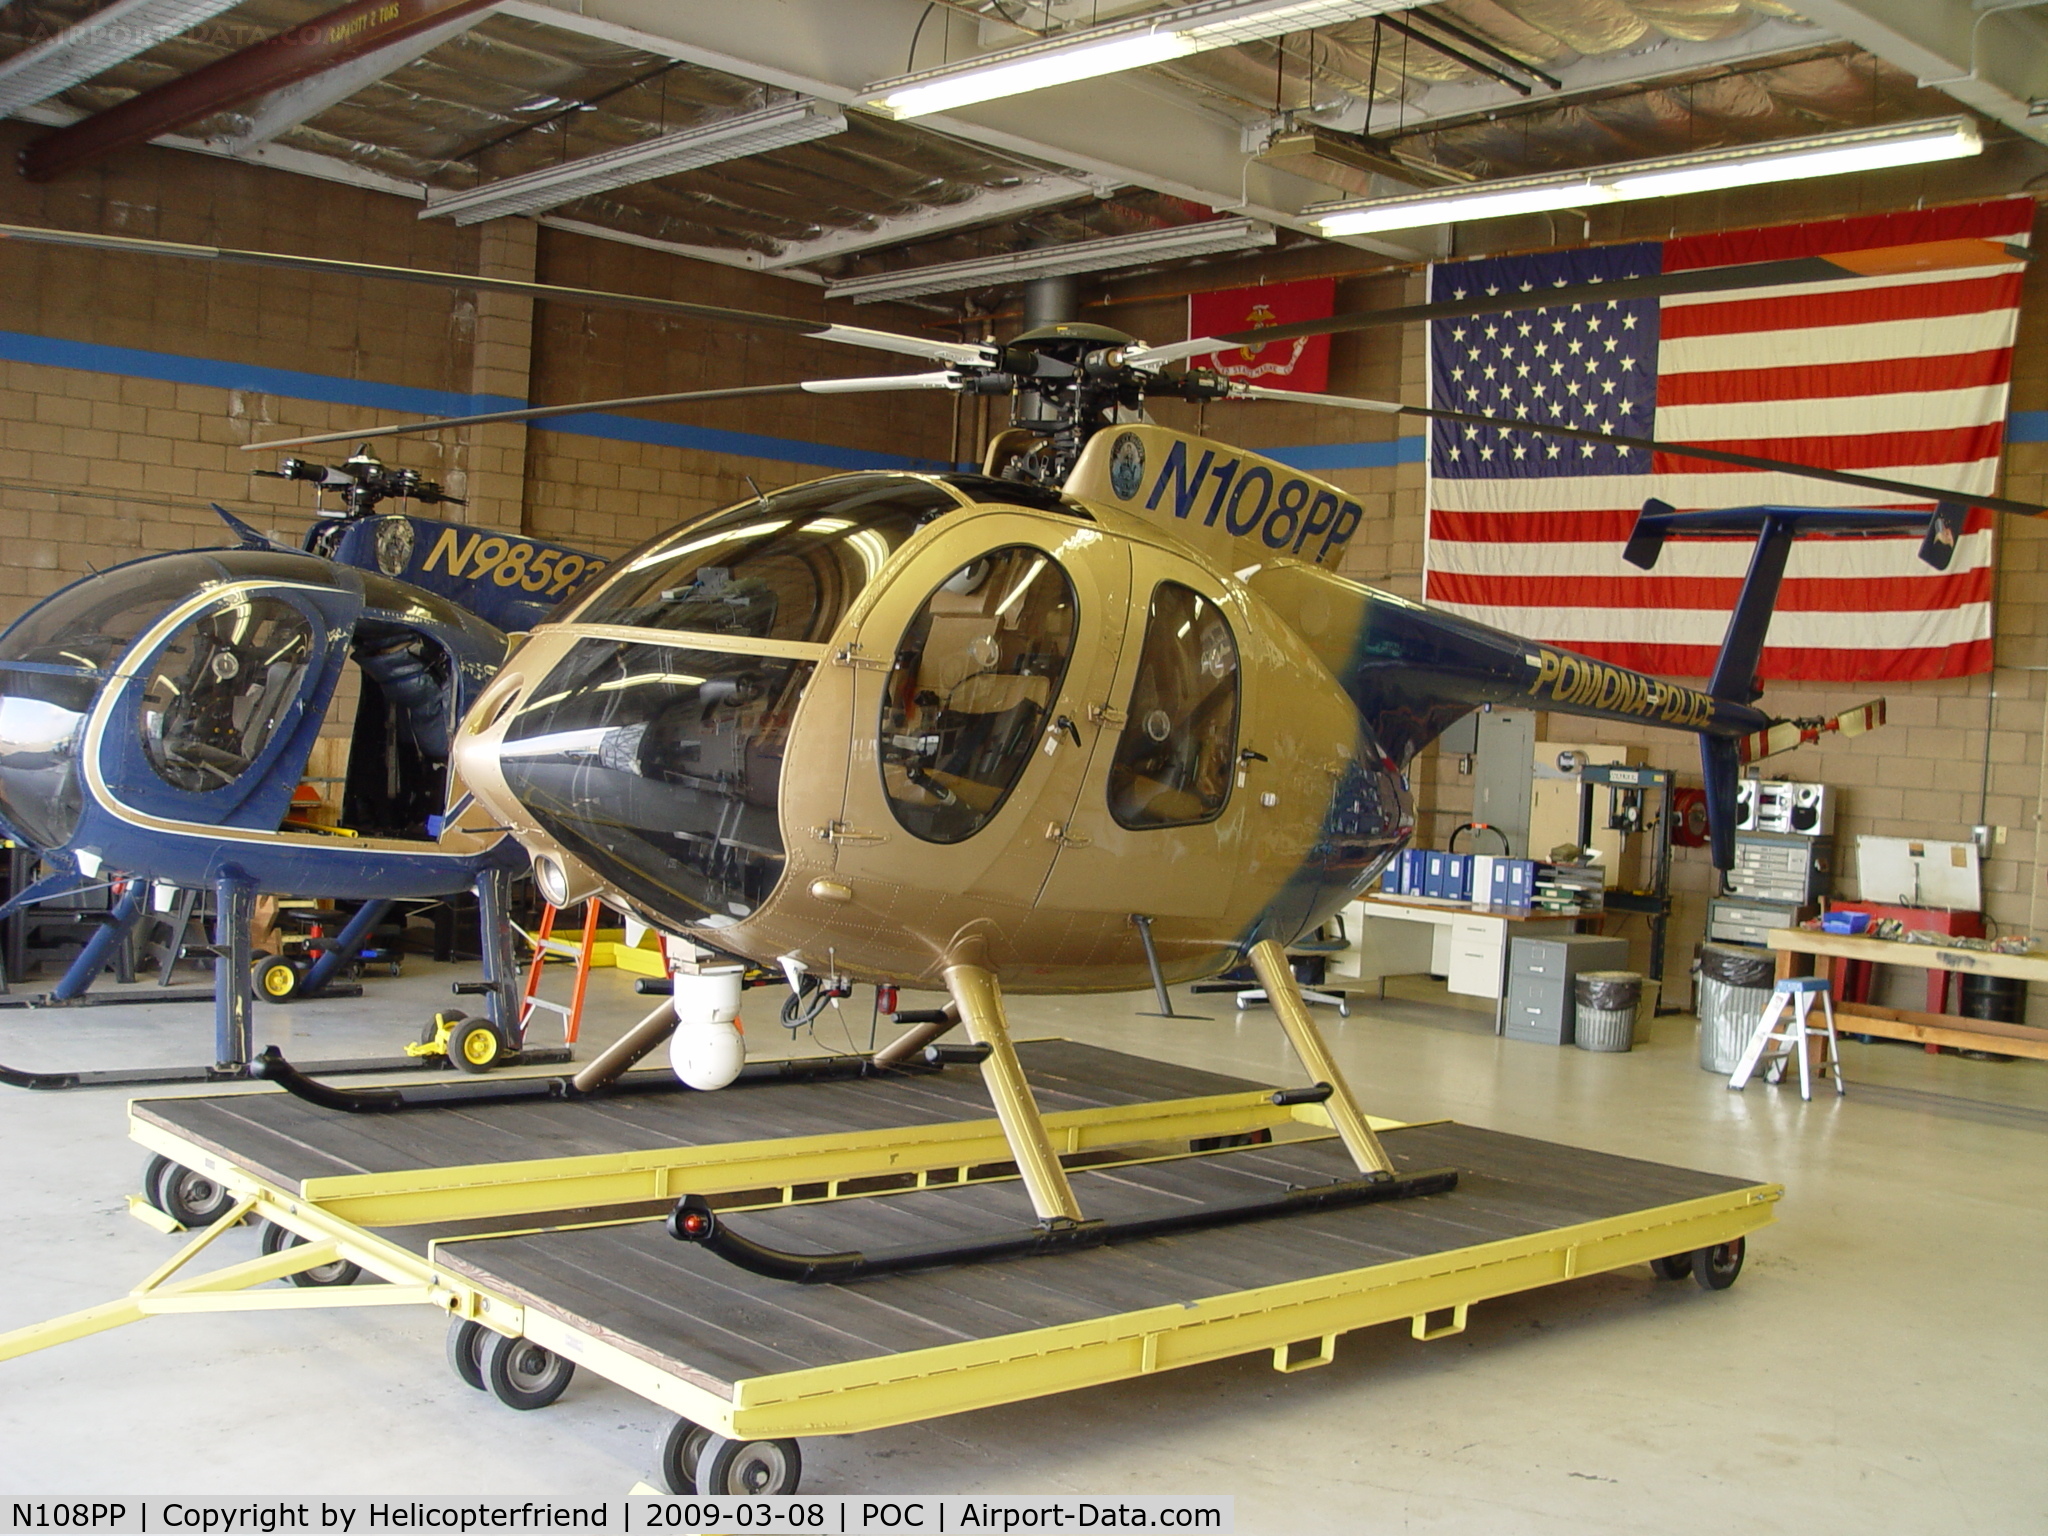 N108PP, 2008 MD Helicopters 369E C/N 0578E, Sitting in the hanger waiting to be towed outside